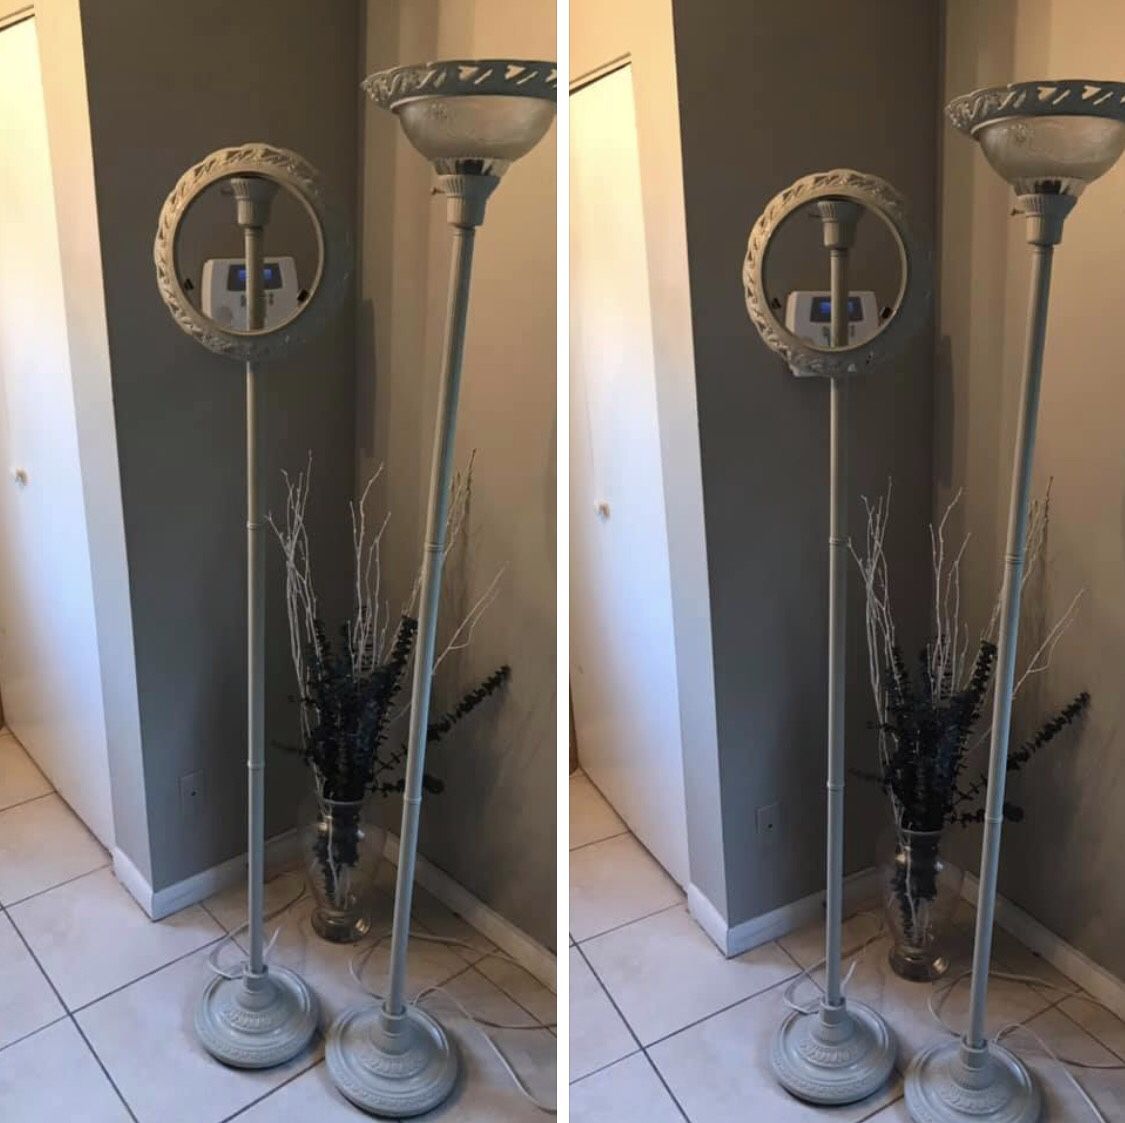 Floor Lamps, 2 Qty. 1 needs replacement glass, both are 3-way and work great. Both retail over $200.00, $50.00 both FIRM, Pickup only MOVING NEED GONE